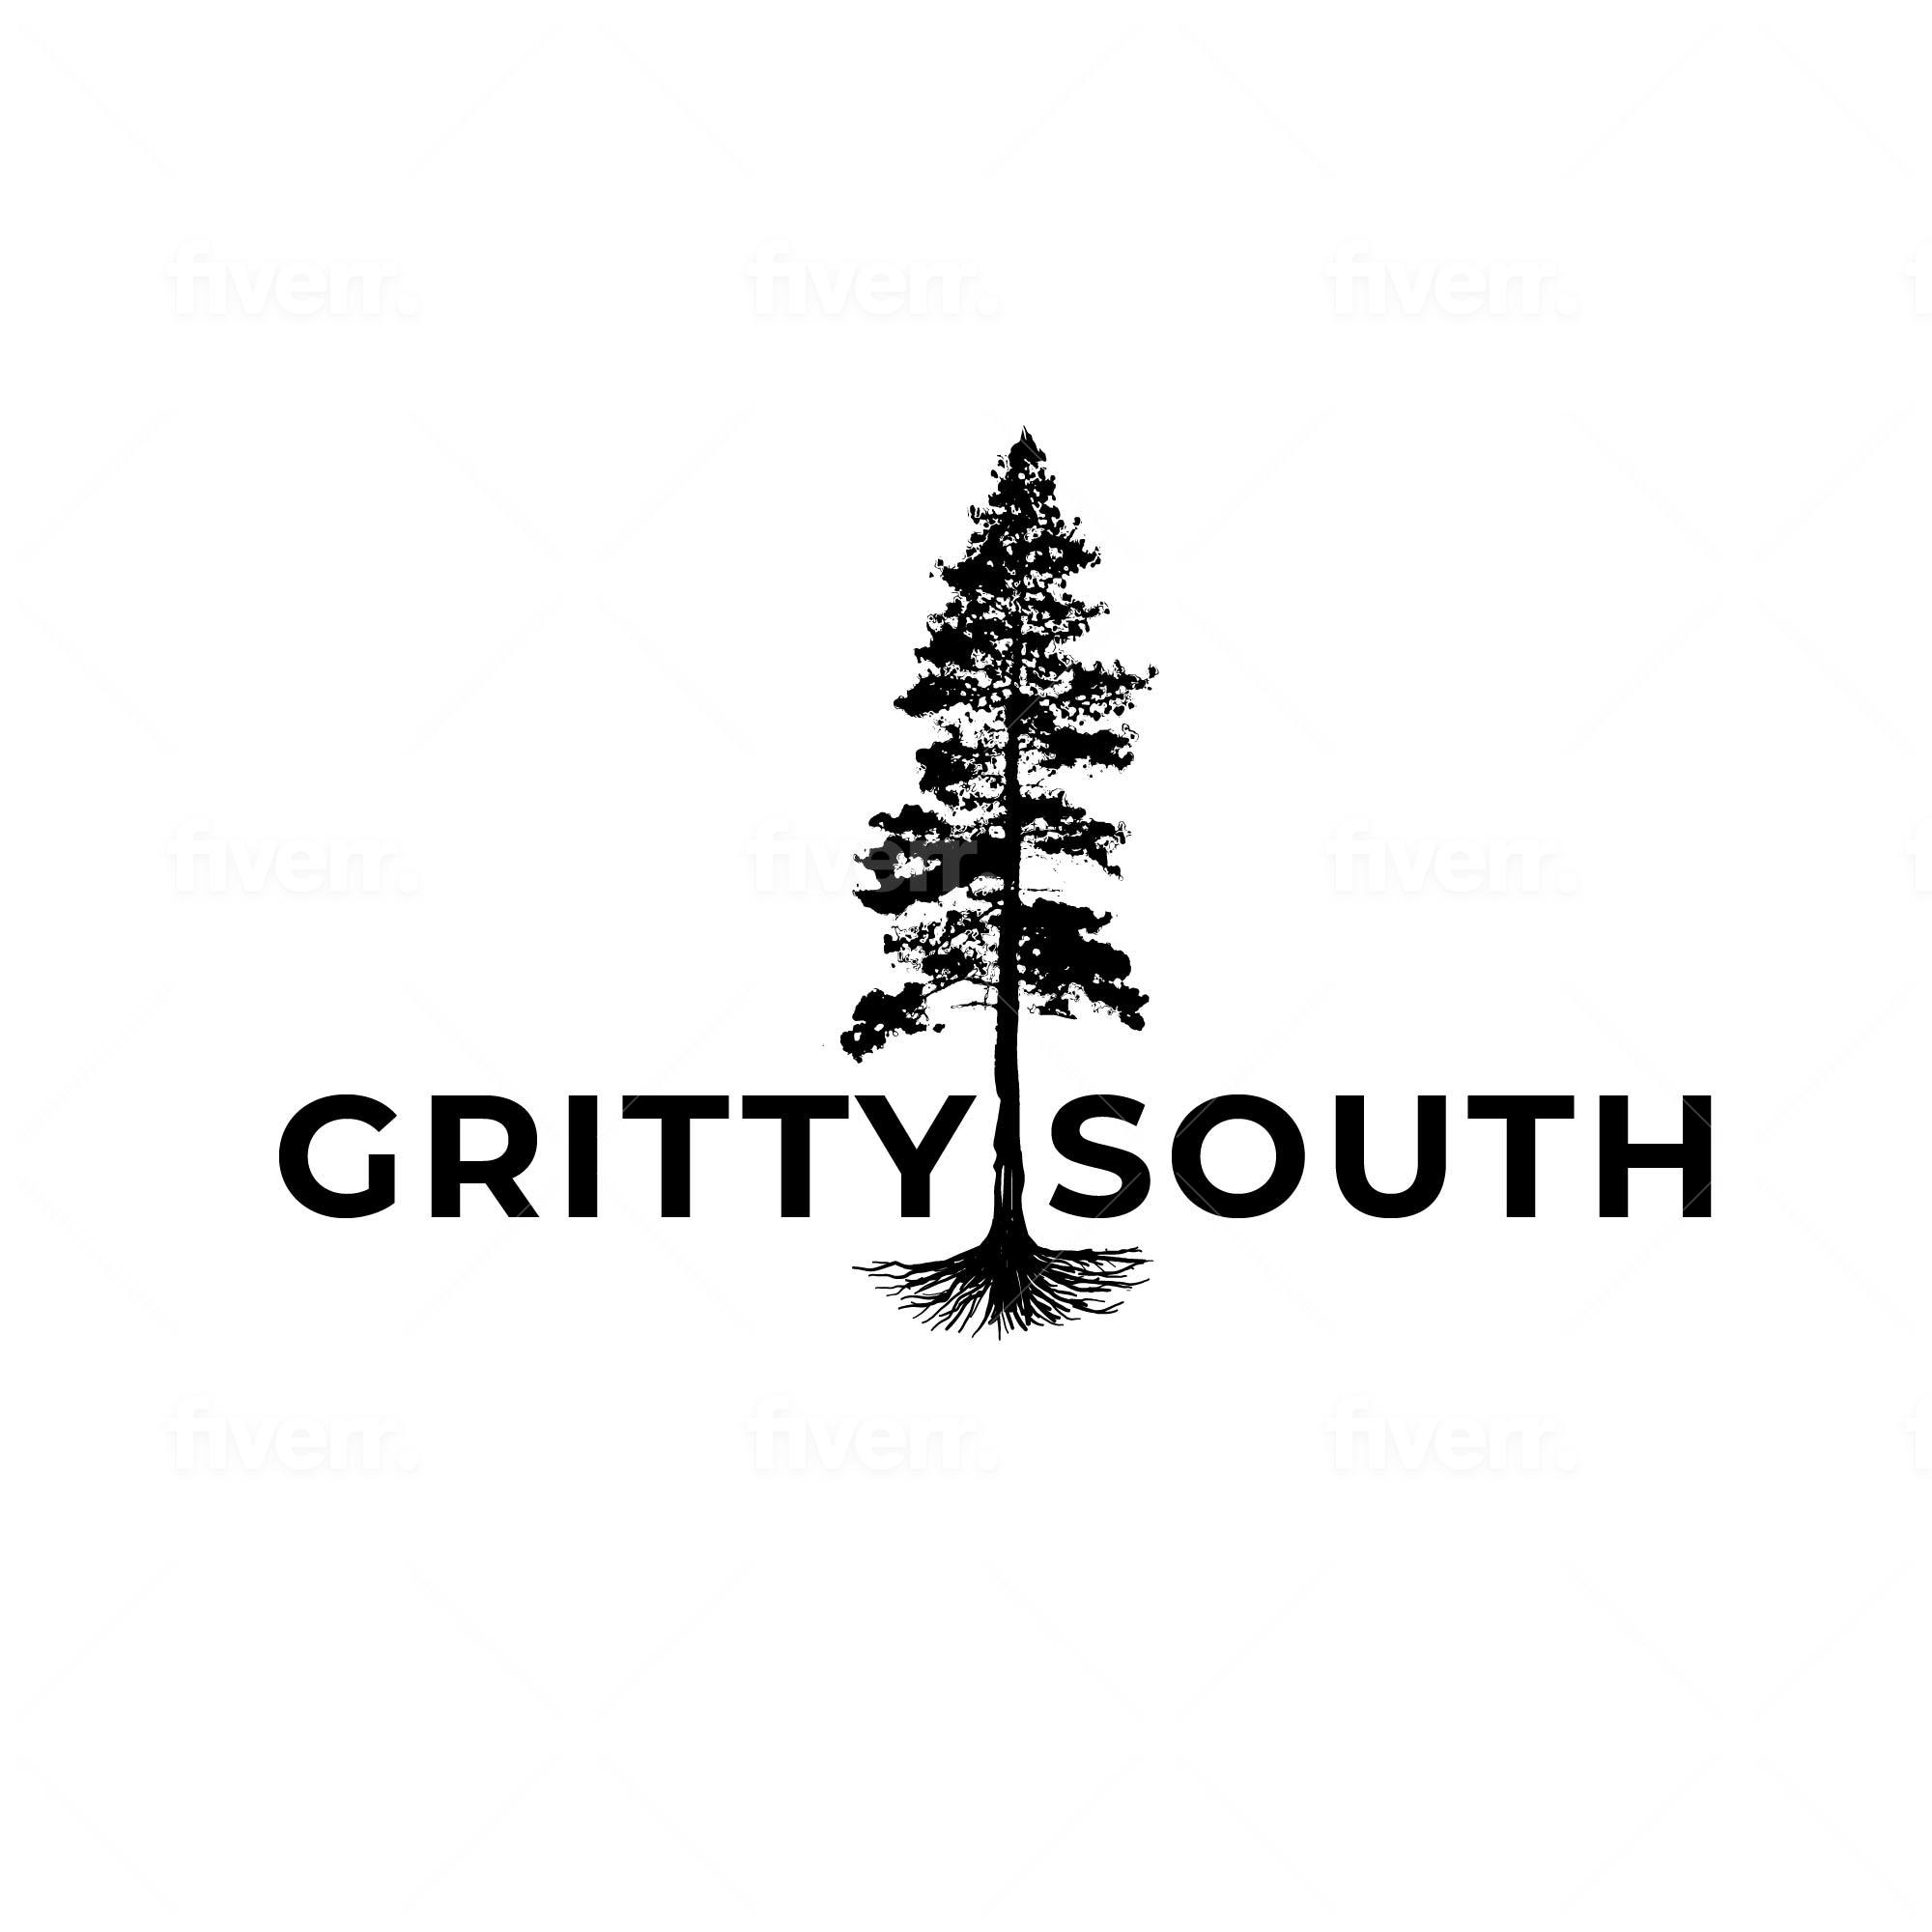 Gritty South